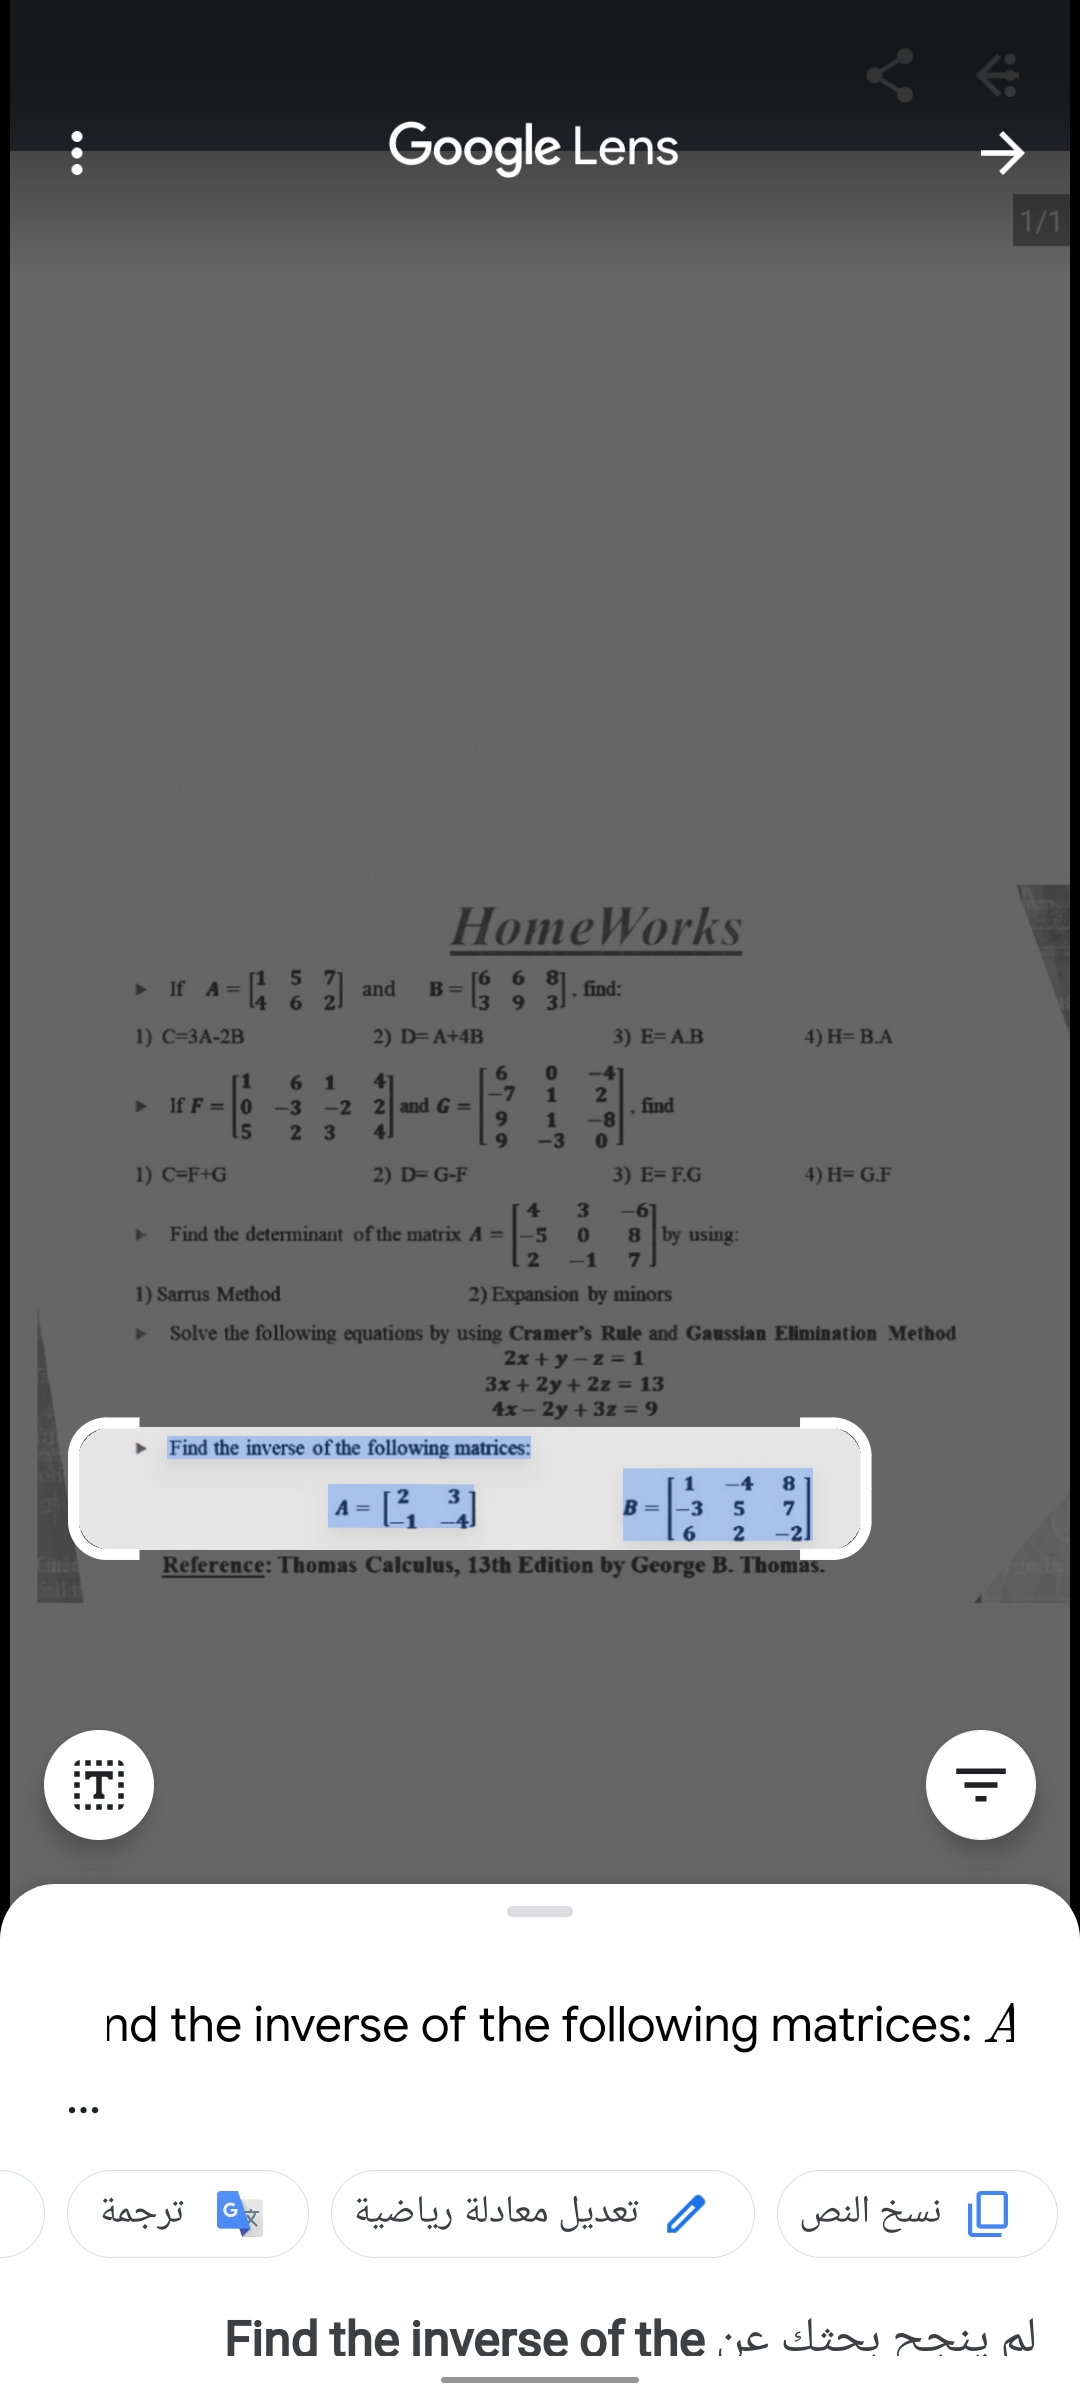 Google Lens
1/1
HomeWorks
> If A=
[1 5 71
and
[6 6 8
B=
find:
14
6.
2.
13
93
1) C=3A-2B
2) D= A+4B
3) E= A.B
4) H= B.A
-41
1
[1
6 1
-3 -2 2 and G
15
41
-7
AV
If F = 0
find
1
-3
2 3
41
9.
1) C=F+G
2) D= G-F
3) E= F.G
4) H= G.F
4.
3.
-6]
Find the deteminant of the matrix A =
-5
8 by using:
-1
1) Sarrus Method
2) Expansion by minors
Solve the following equations by using Cramer's Rule and Gaussian Elimination Method
2x + y – z = 1
3x + 2y + 2z = 13
4x- 2y + 3z = 9
Find the inverse of the following matrices:
1
-4
A = L
B =-3
8.
5
-2]
Reference: Thomas Calculus, 13th Edition by George B. Thomas.
:T
nd the inverse of the following matrices: A
ترجمة
تعديل معادلة رياضية
ر نسخ النص
Find the inverse of the c liu
